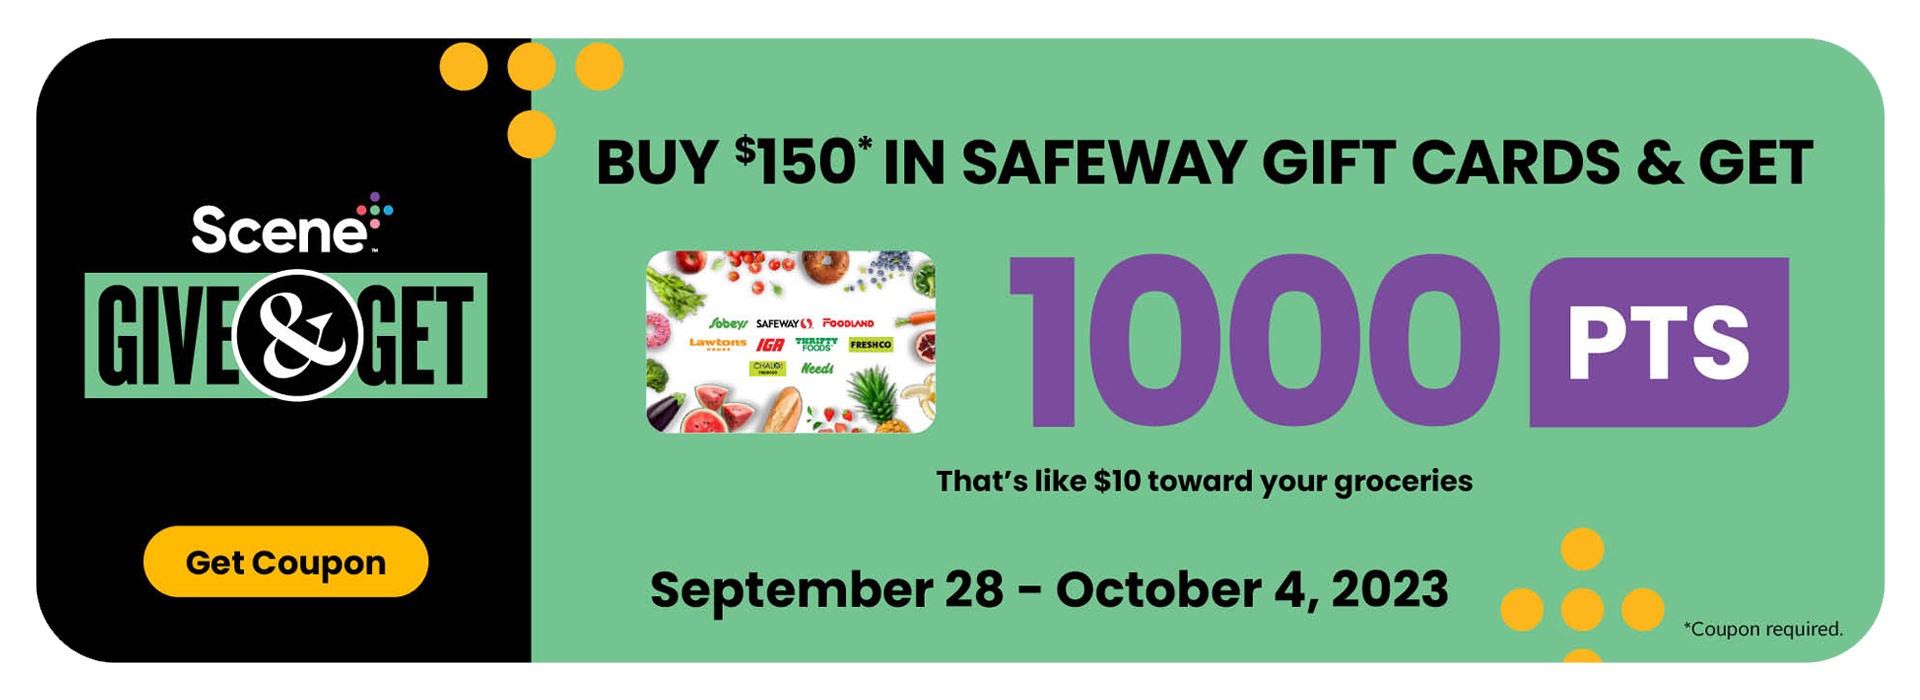 Give & Get All Week Long! Buy $150 in Safeway Gift Cards Get 1000 PTS